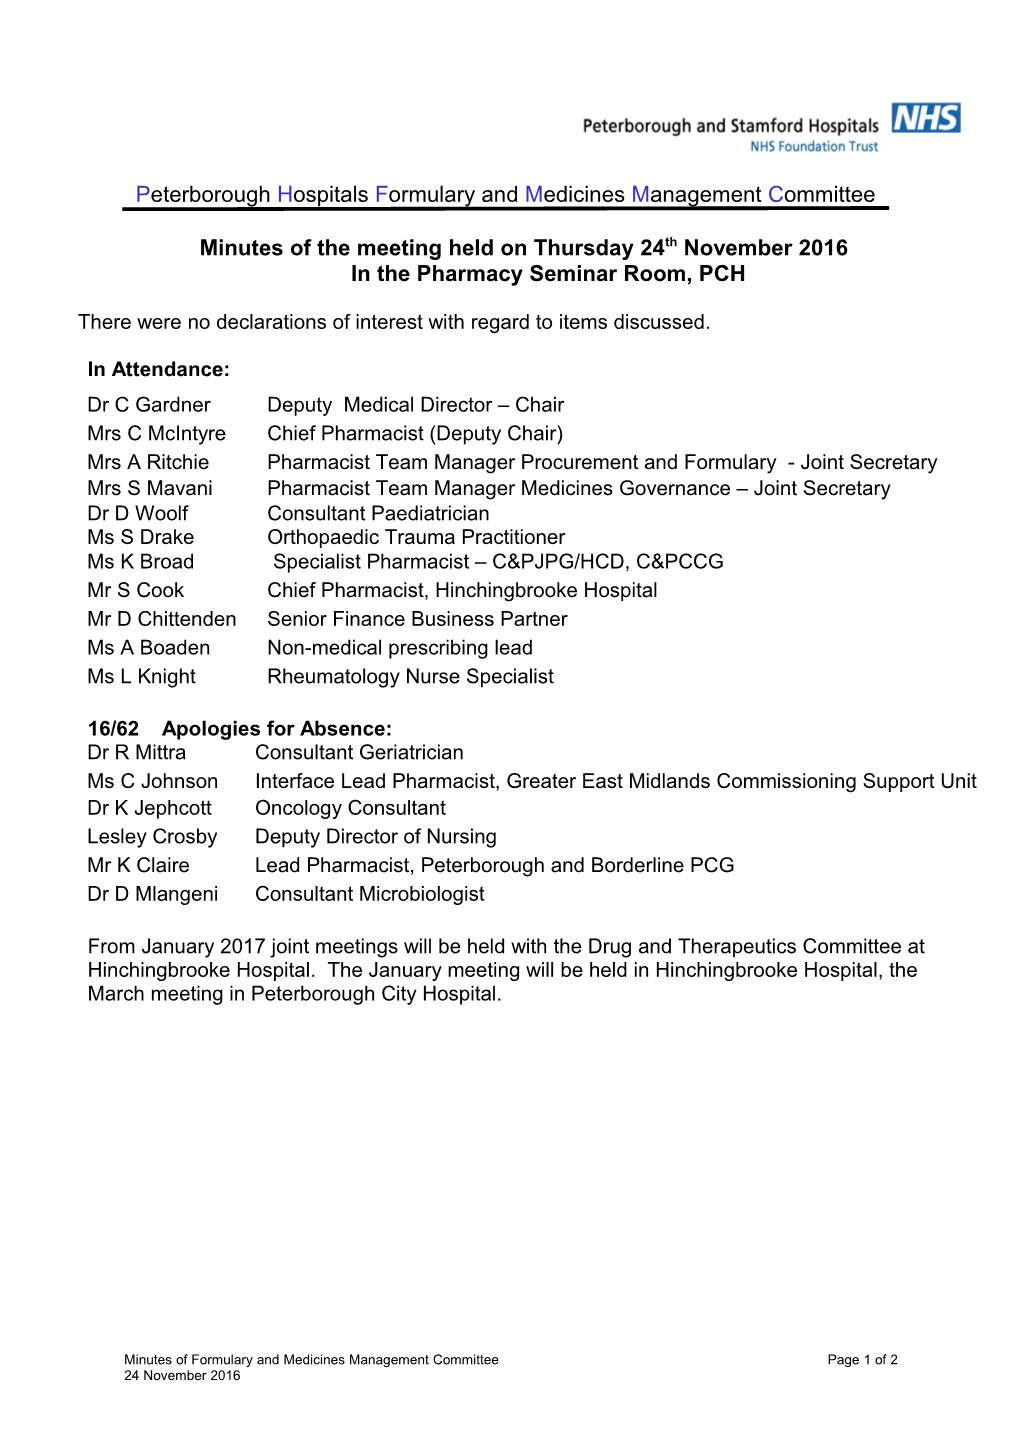 Minutes of the Meeting Held on Thursday 24Th November2016